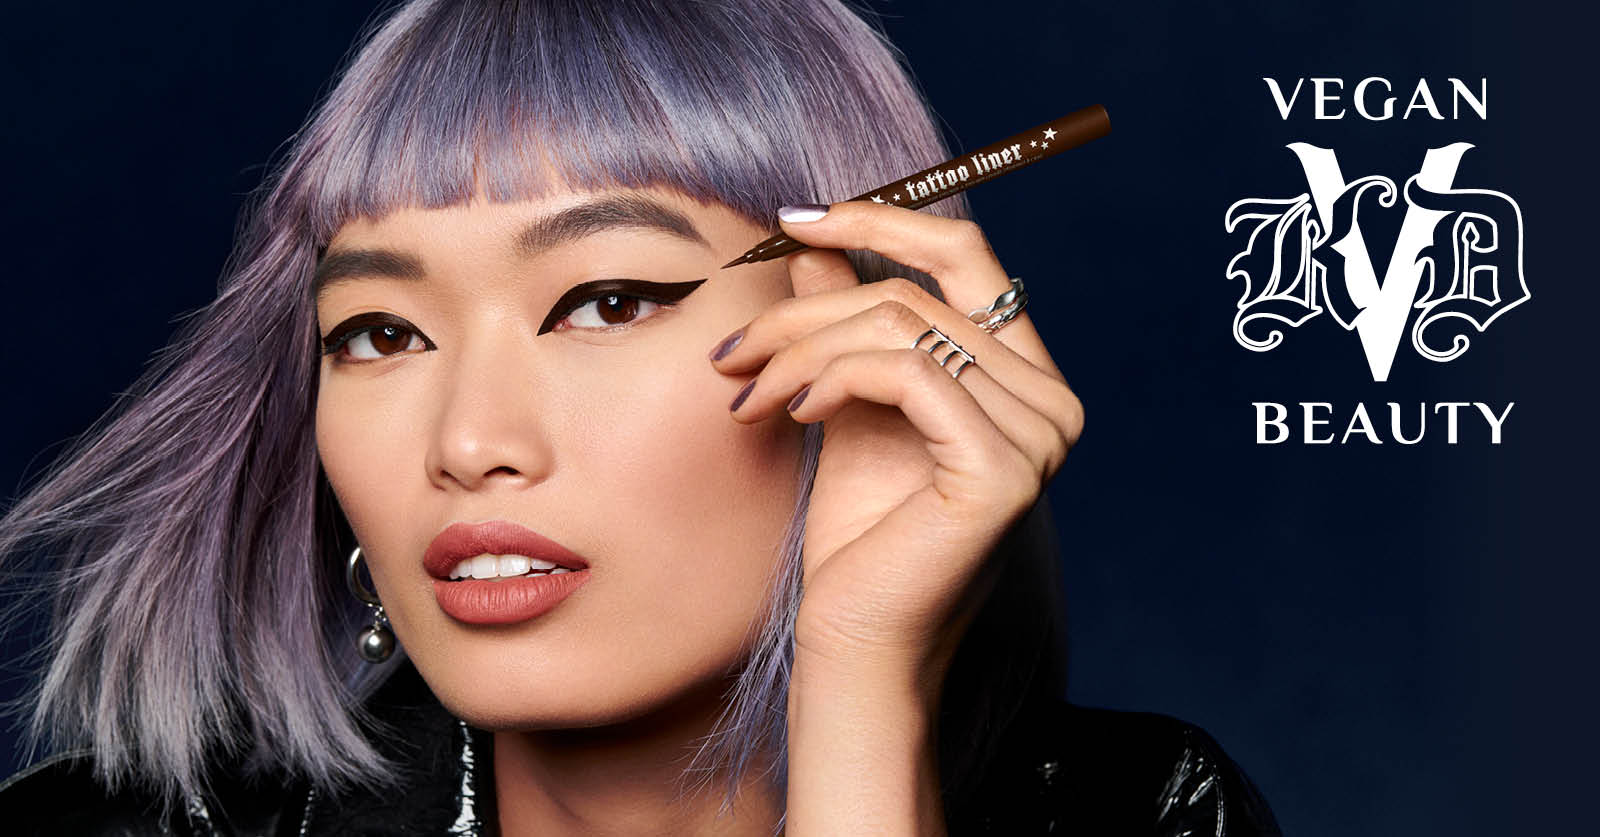 Vegan Celebrates CAT EYES FOR with New Global Campaign